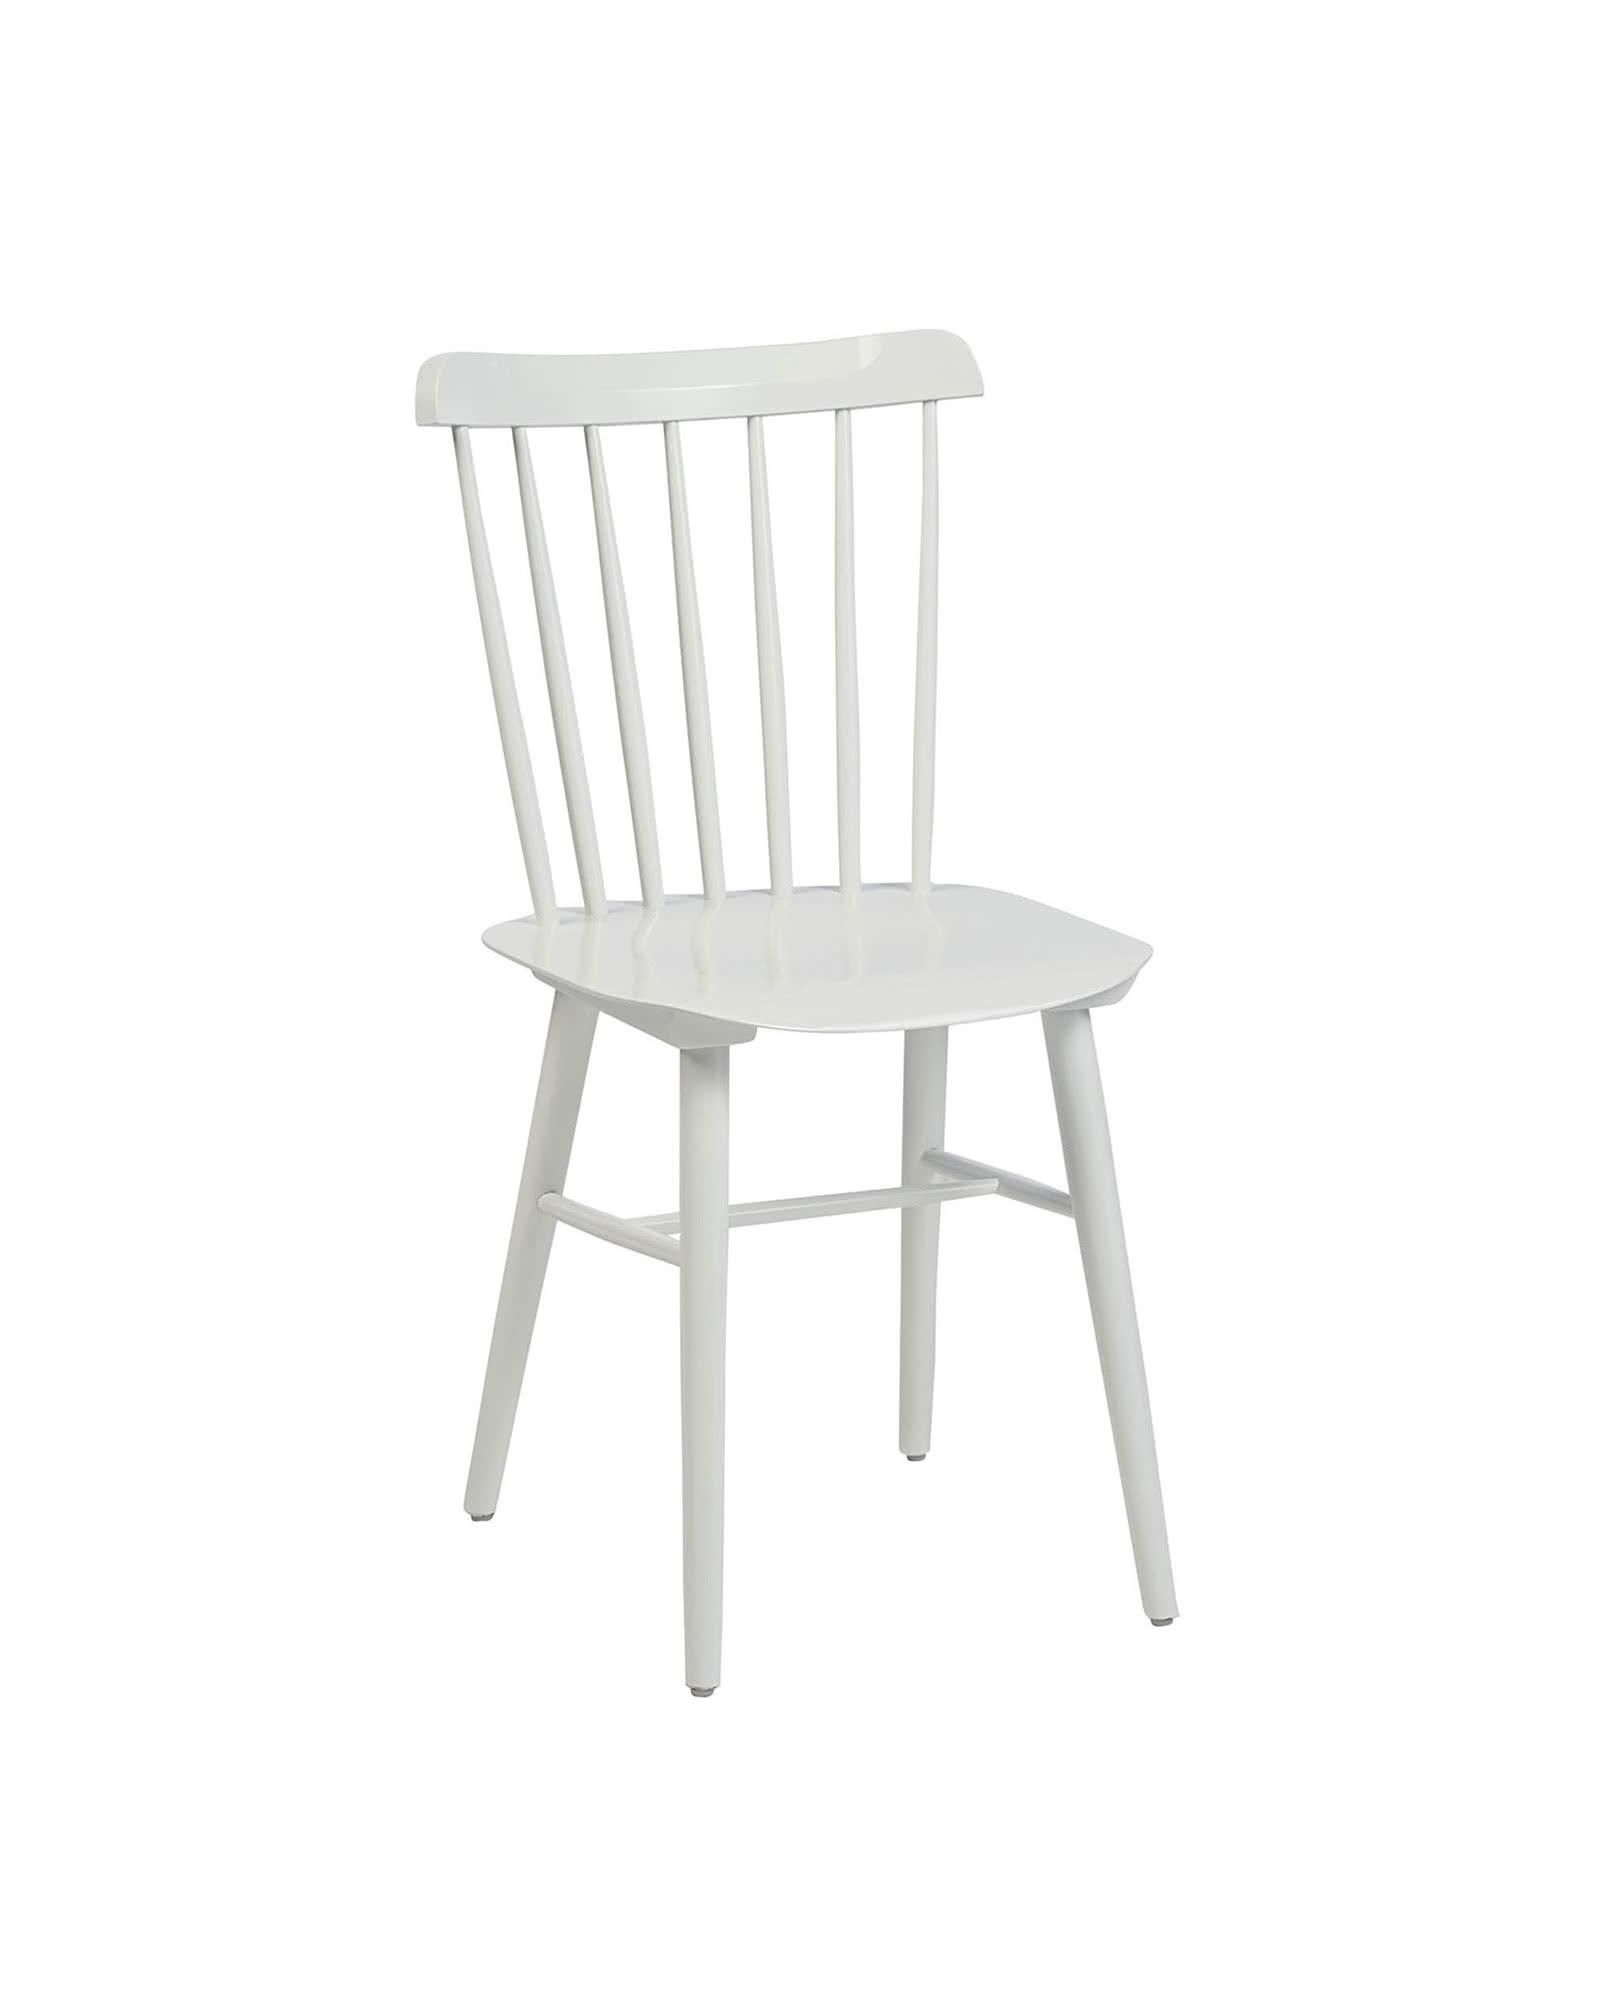 Tucker Dining Chair | Serena and Lily